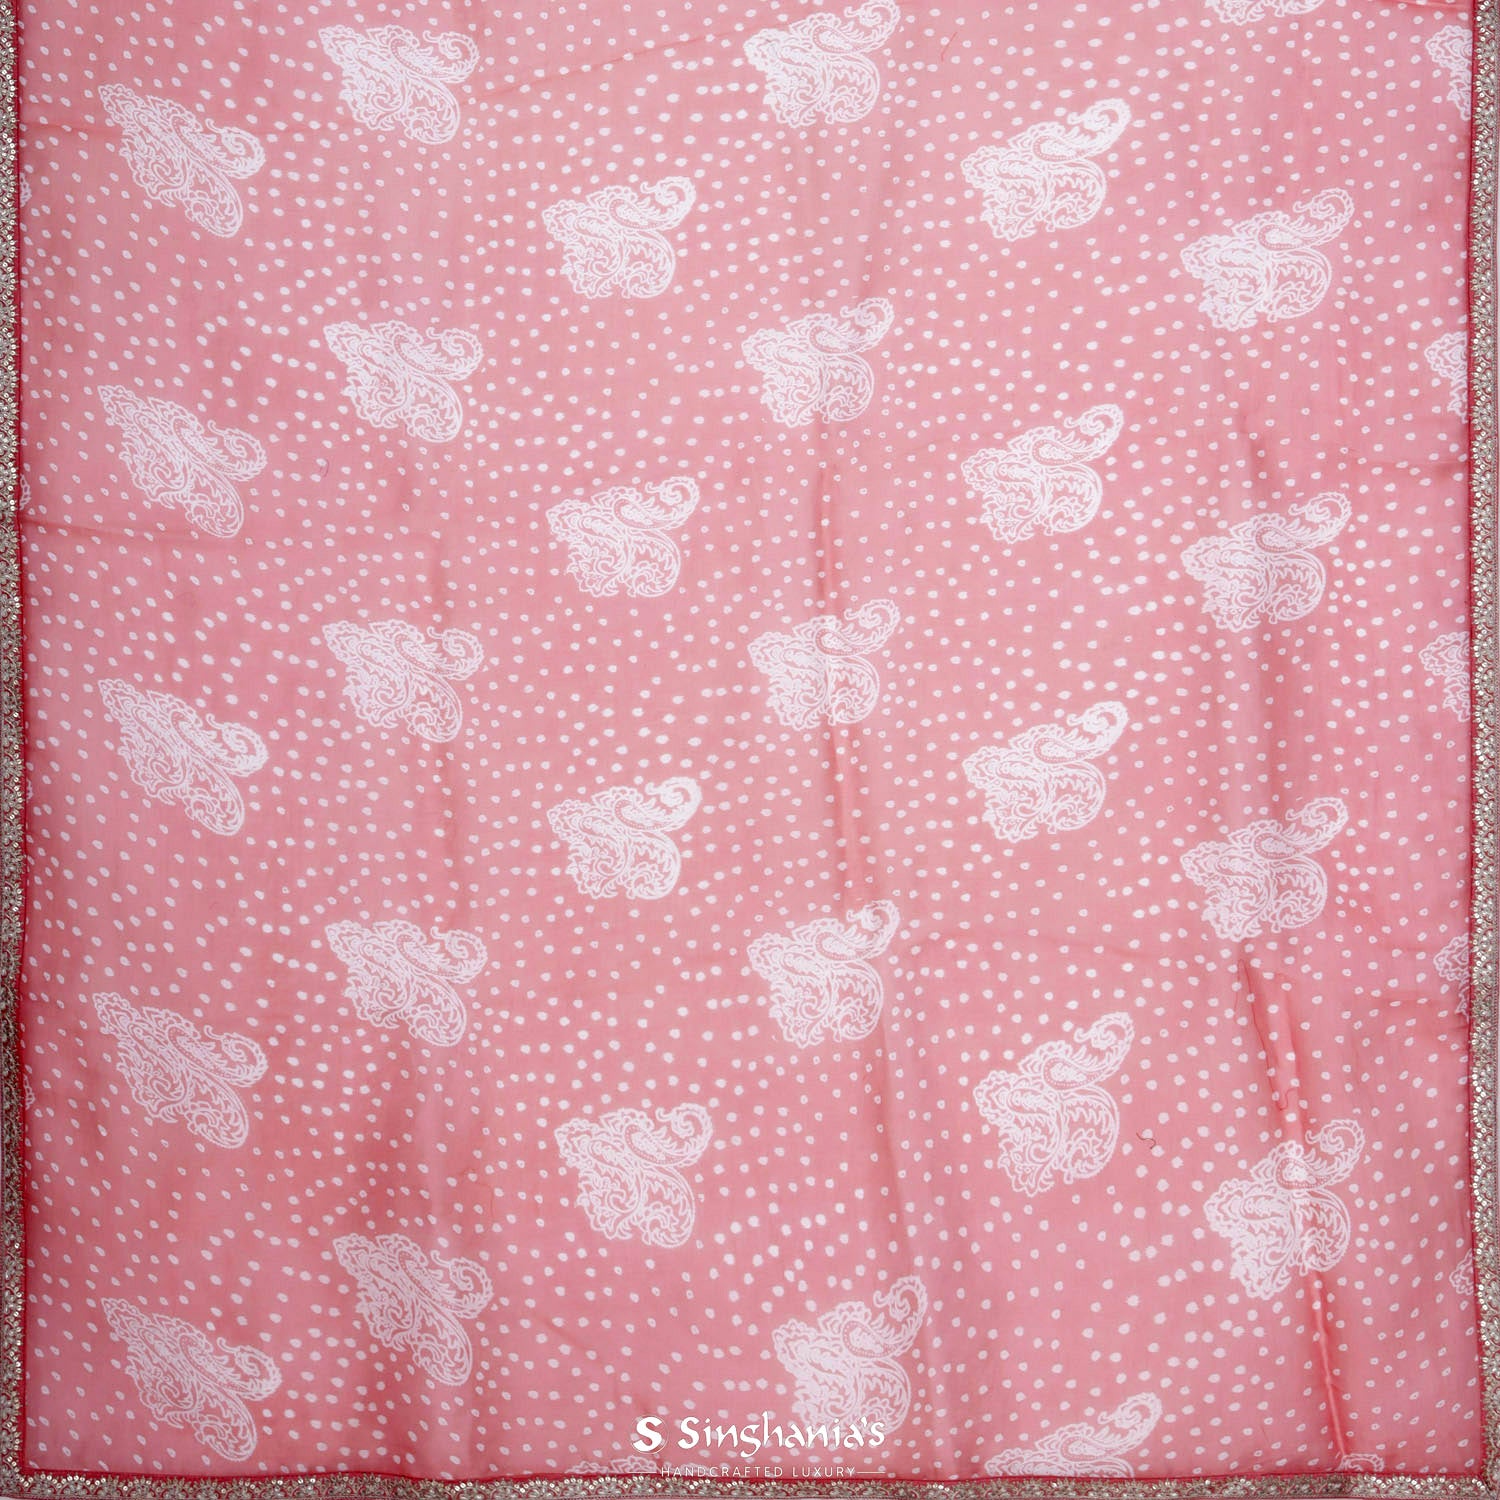 Strawberry Pink Organza Saree With Bandhani And Floral Pattern